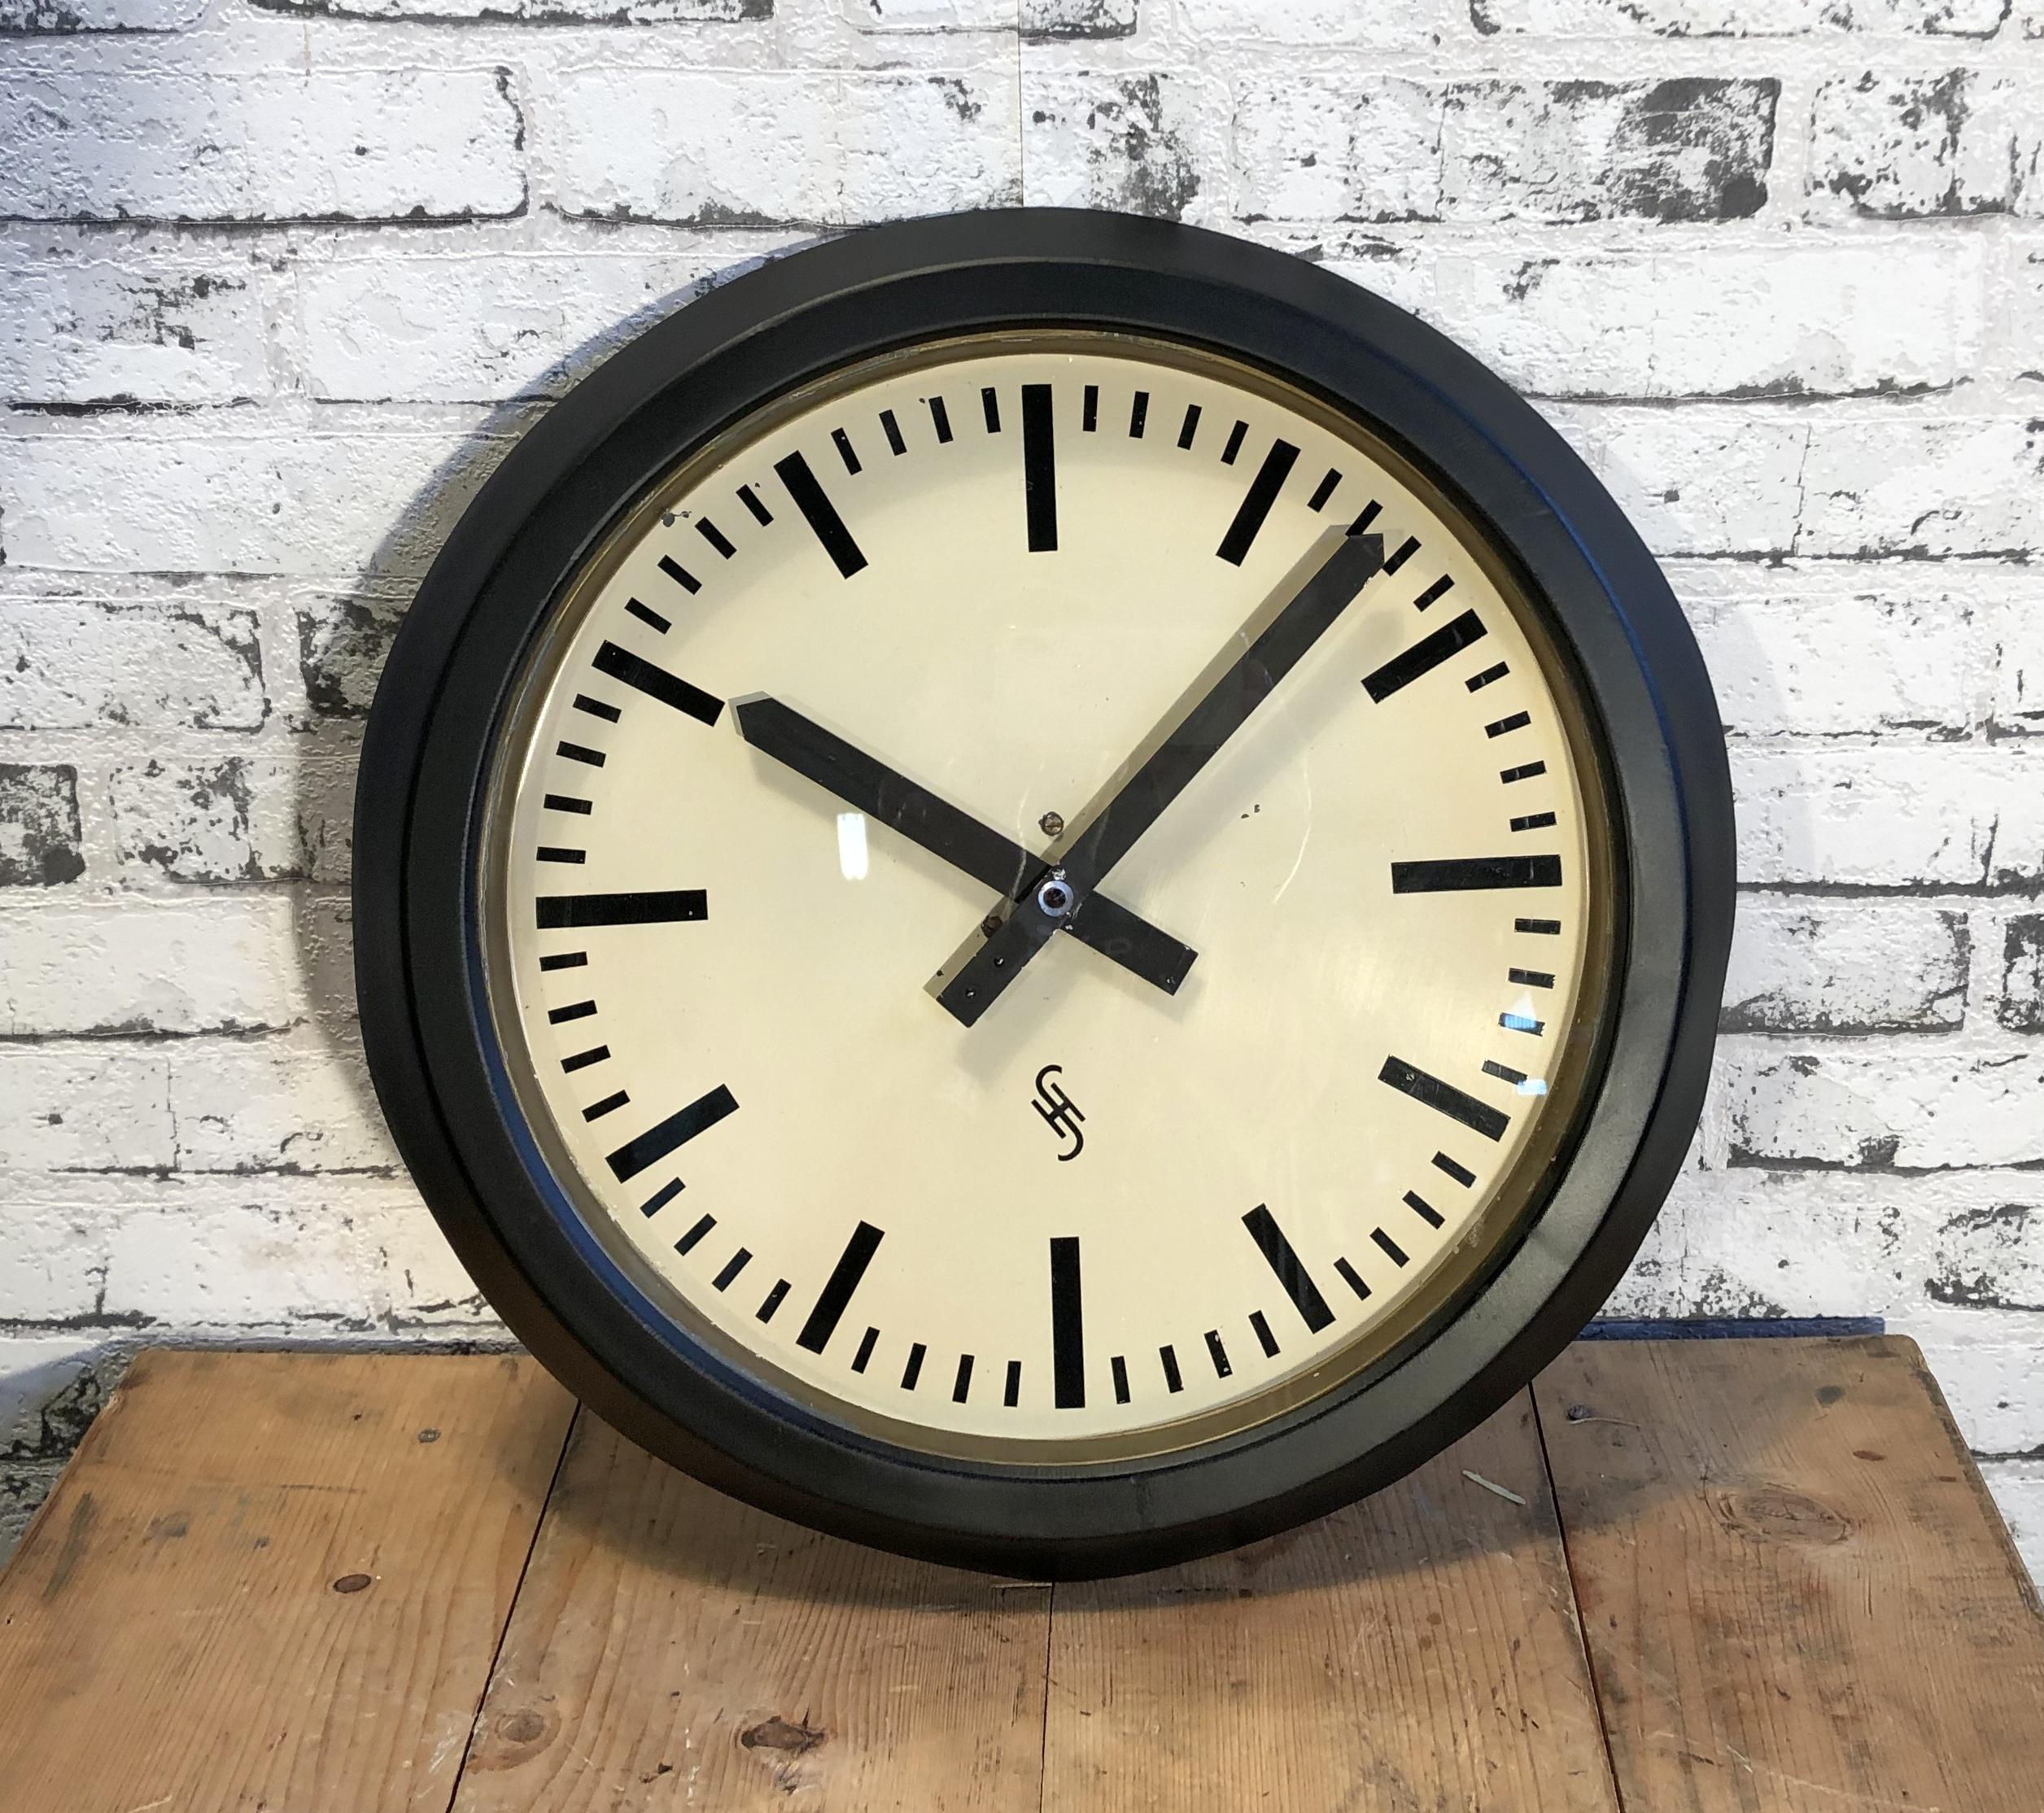 This large wall clock was produced by Siemens and Halske in Germany during the 1950s. It features a black metal frame, aluminum dial, and a clear glass cover. The piece has been converted into a battery-powered clockwork and requires only one